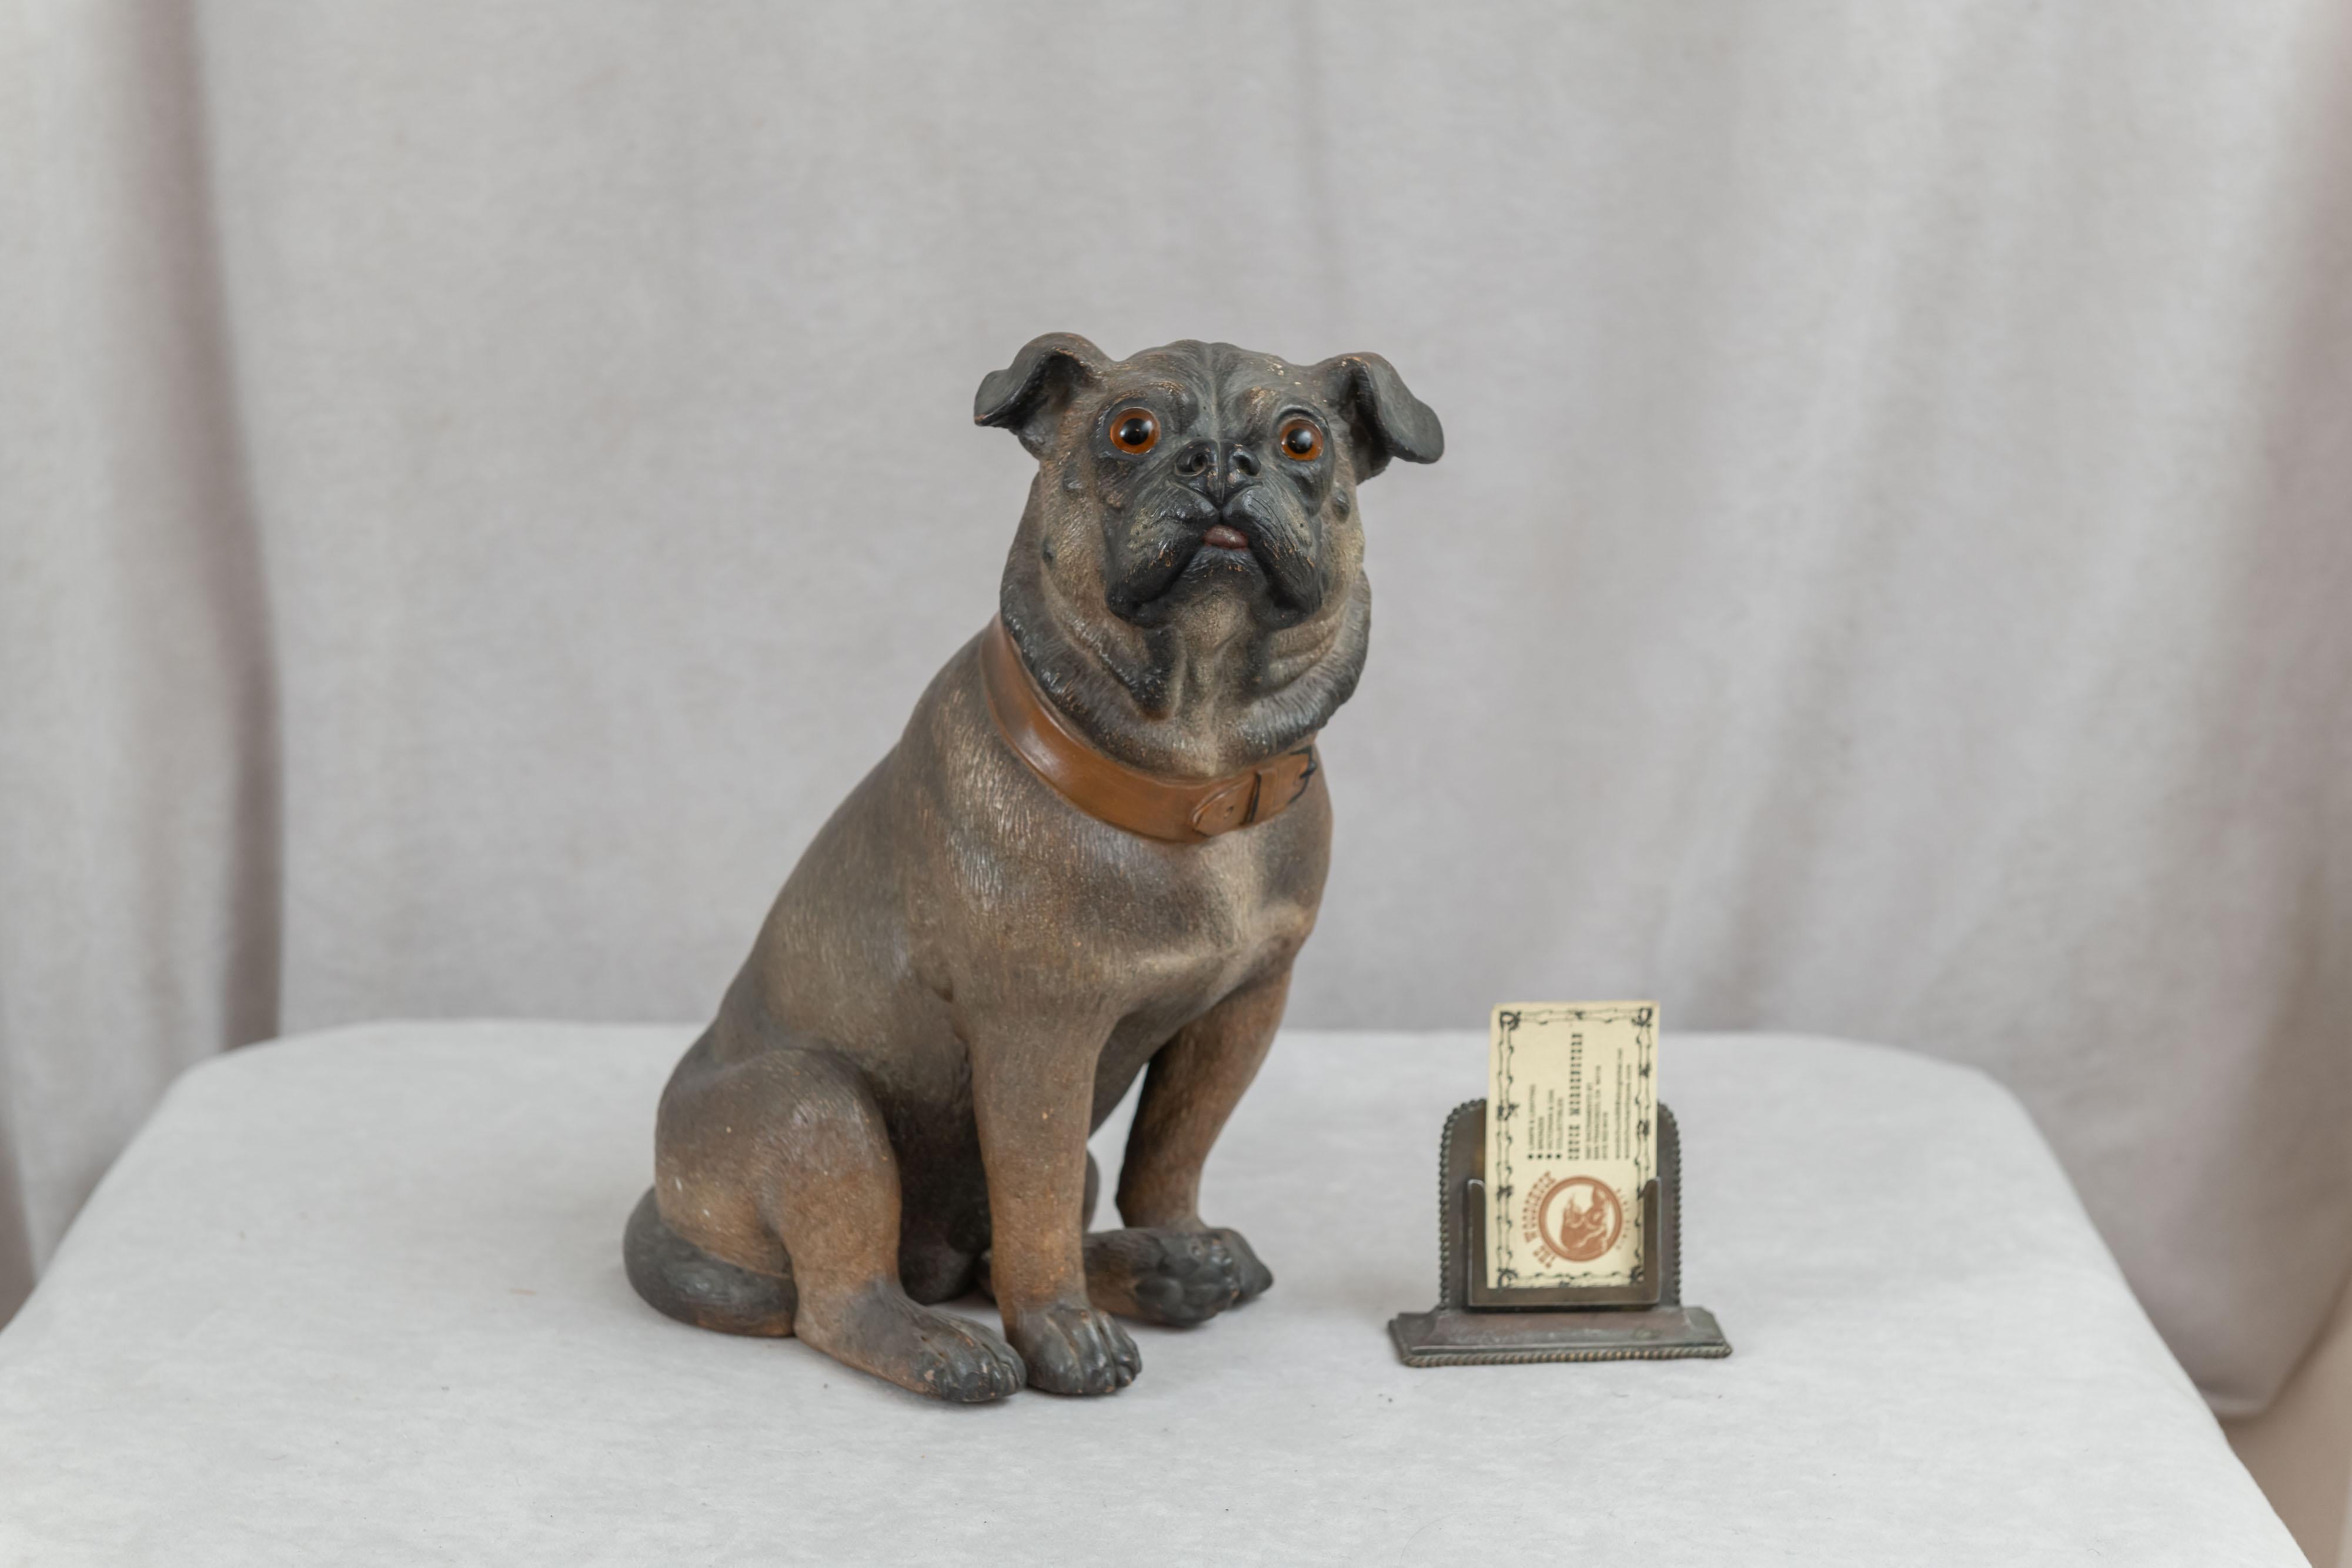 This very life-like pug is a fine example of a well executed terra cotta sculpture. It is hand painted and has the desirable glass eyes which are a wonderful addition to any sculptures of this ilk. His expression, and the little additions, like his